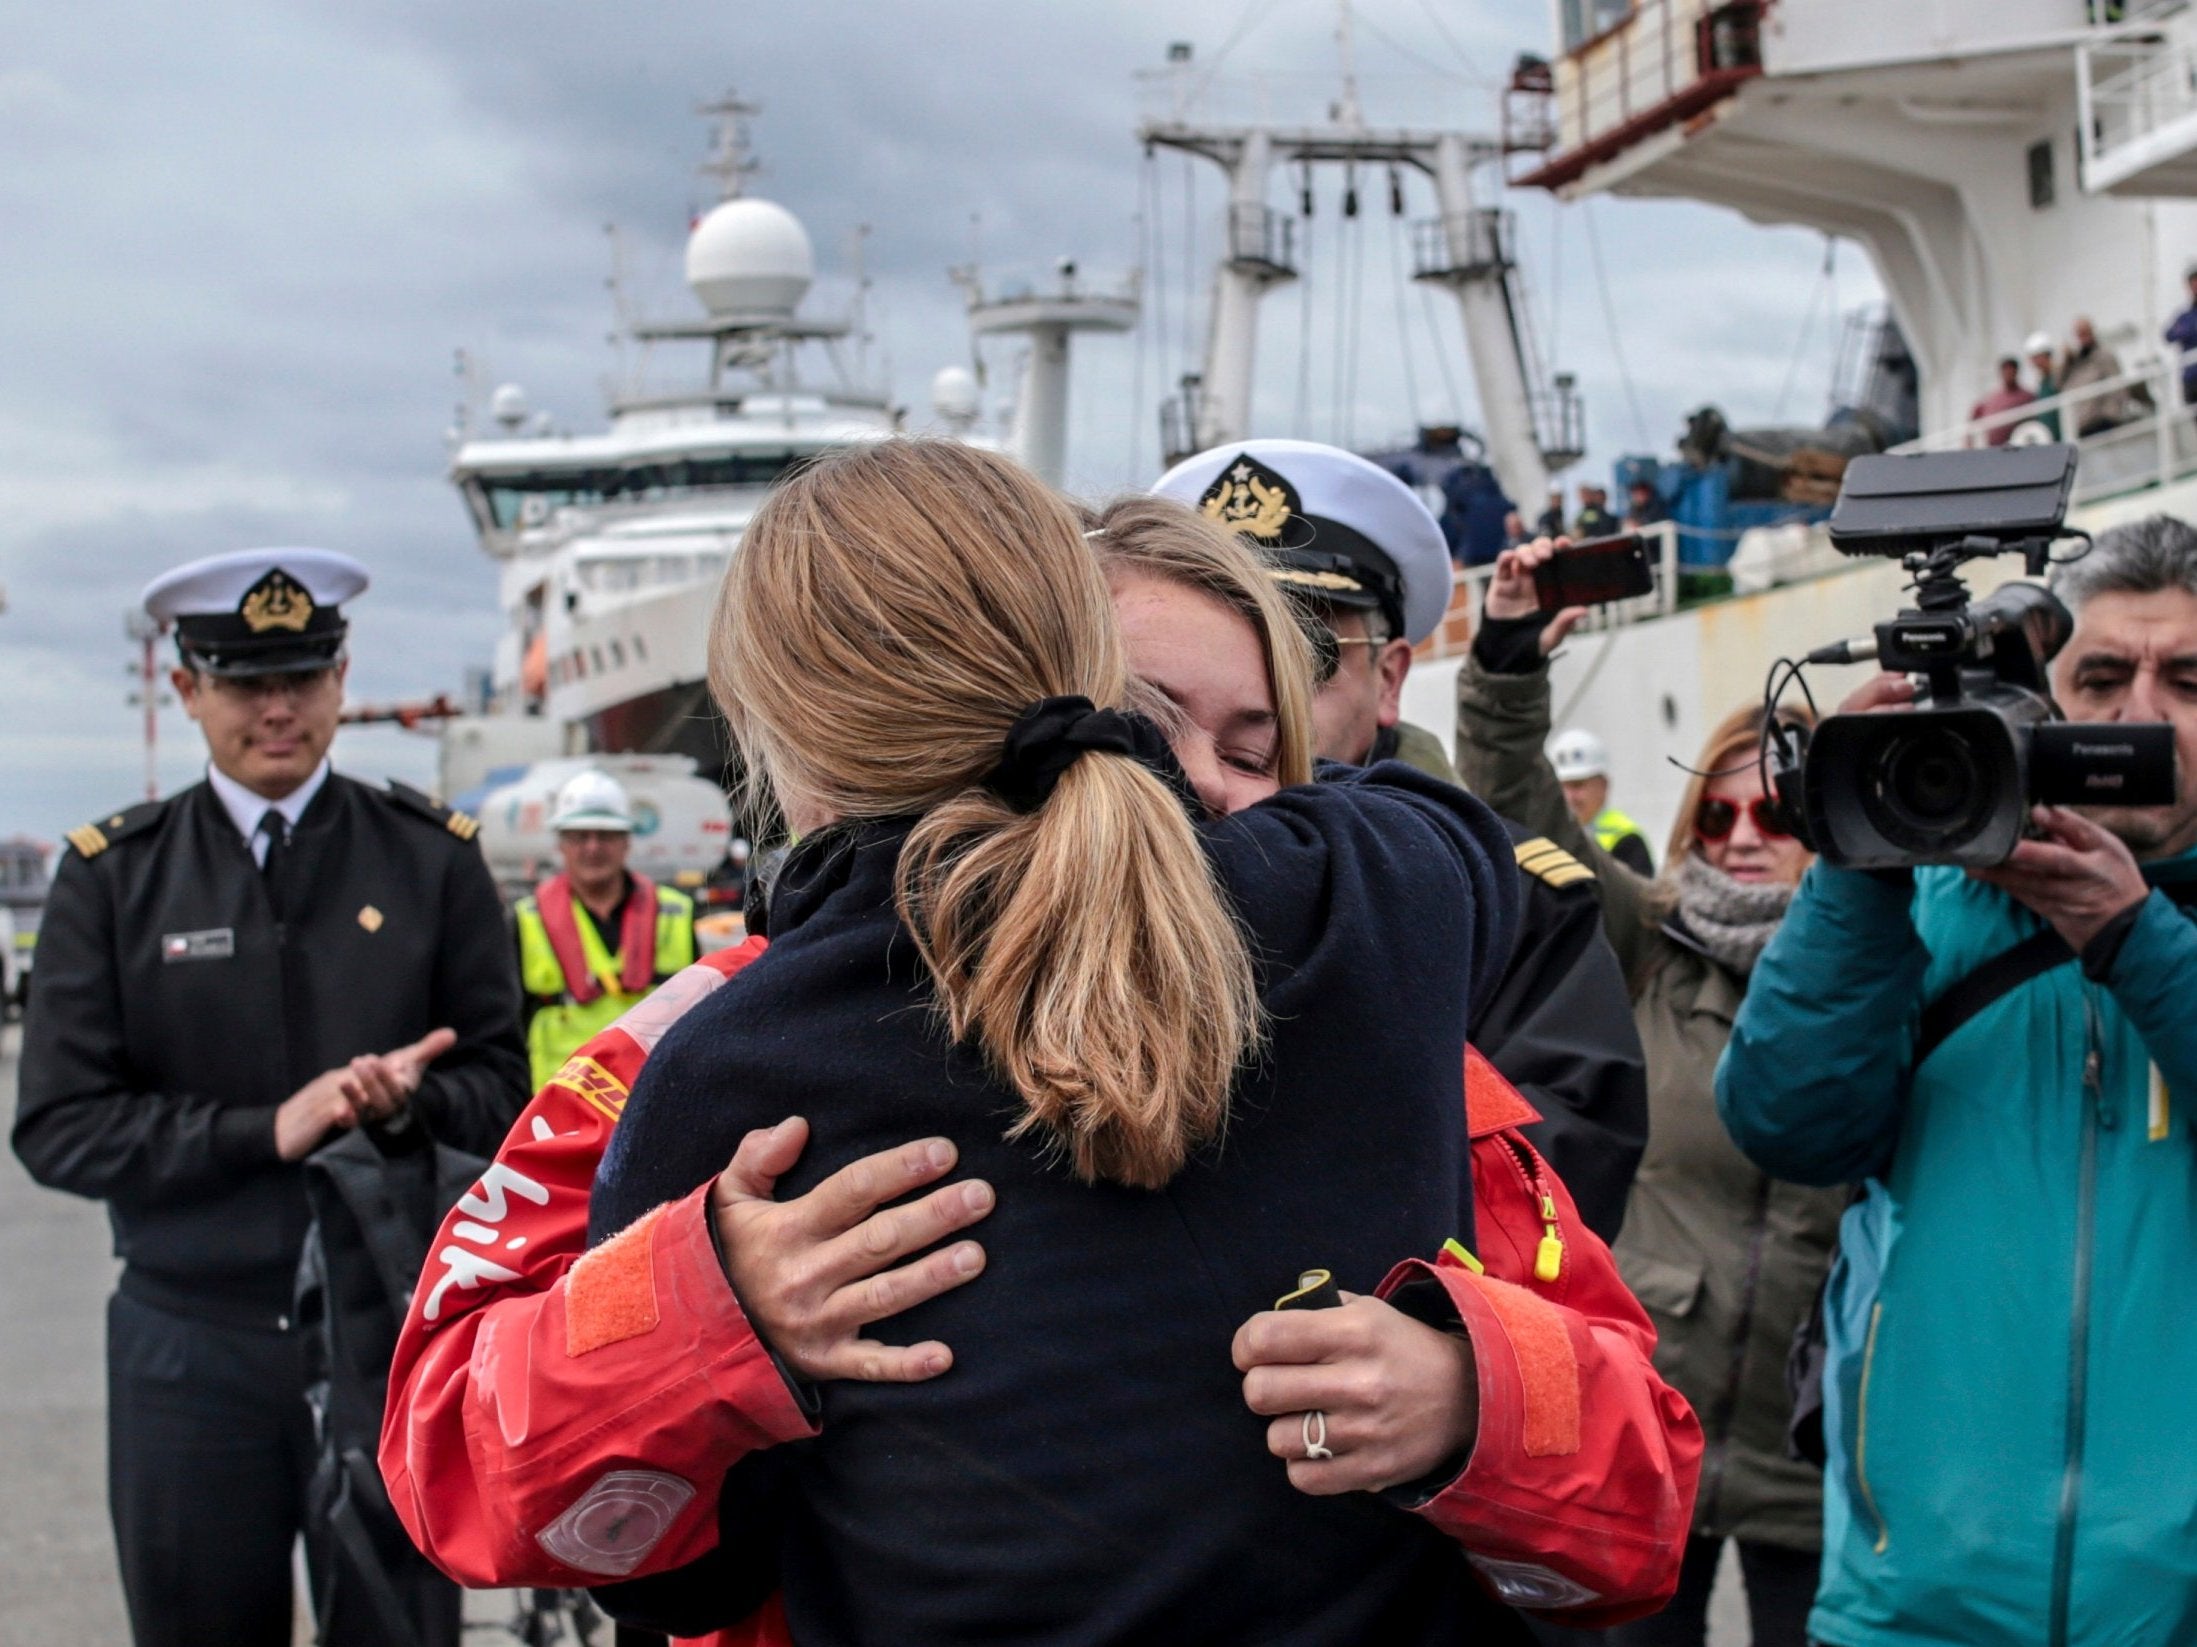 British solo sailor Susie Goodall embraces her mother after arriving on the cargo ship MV Tian Fu in Punta Arenas, Chile, on Friday